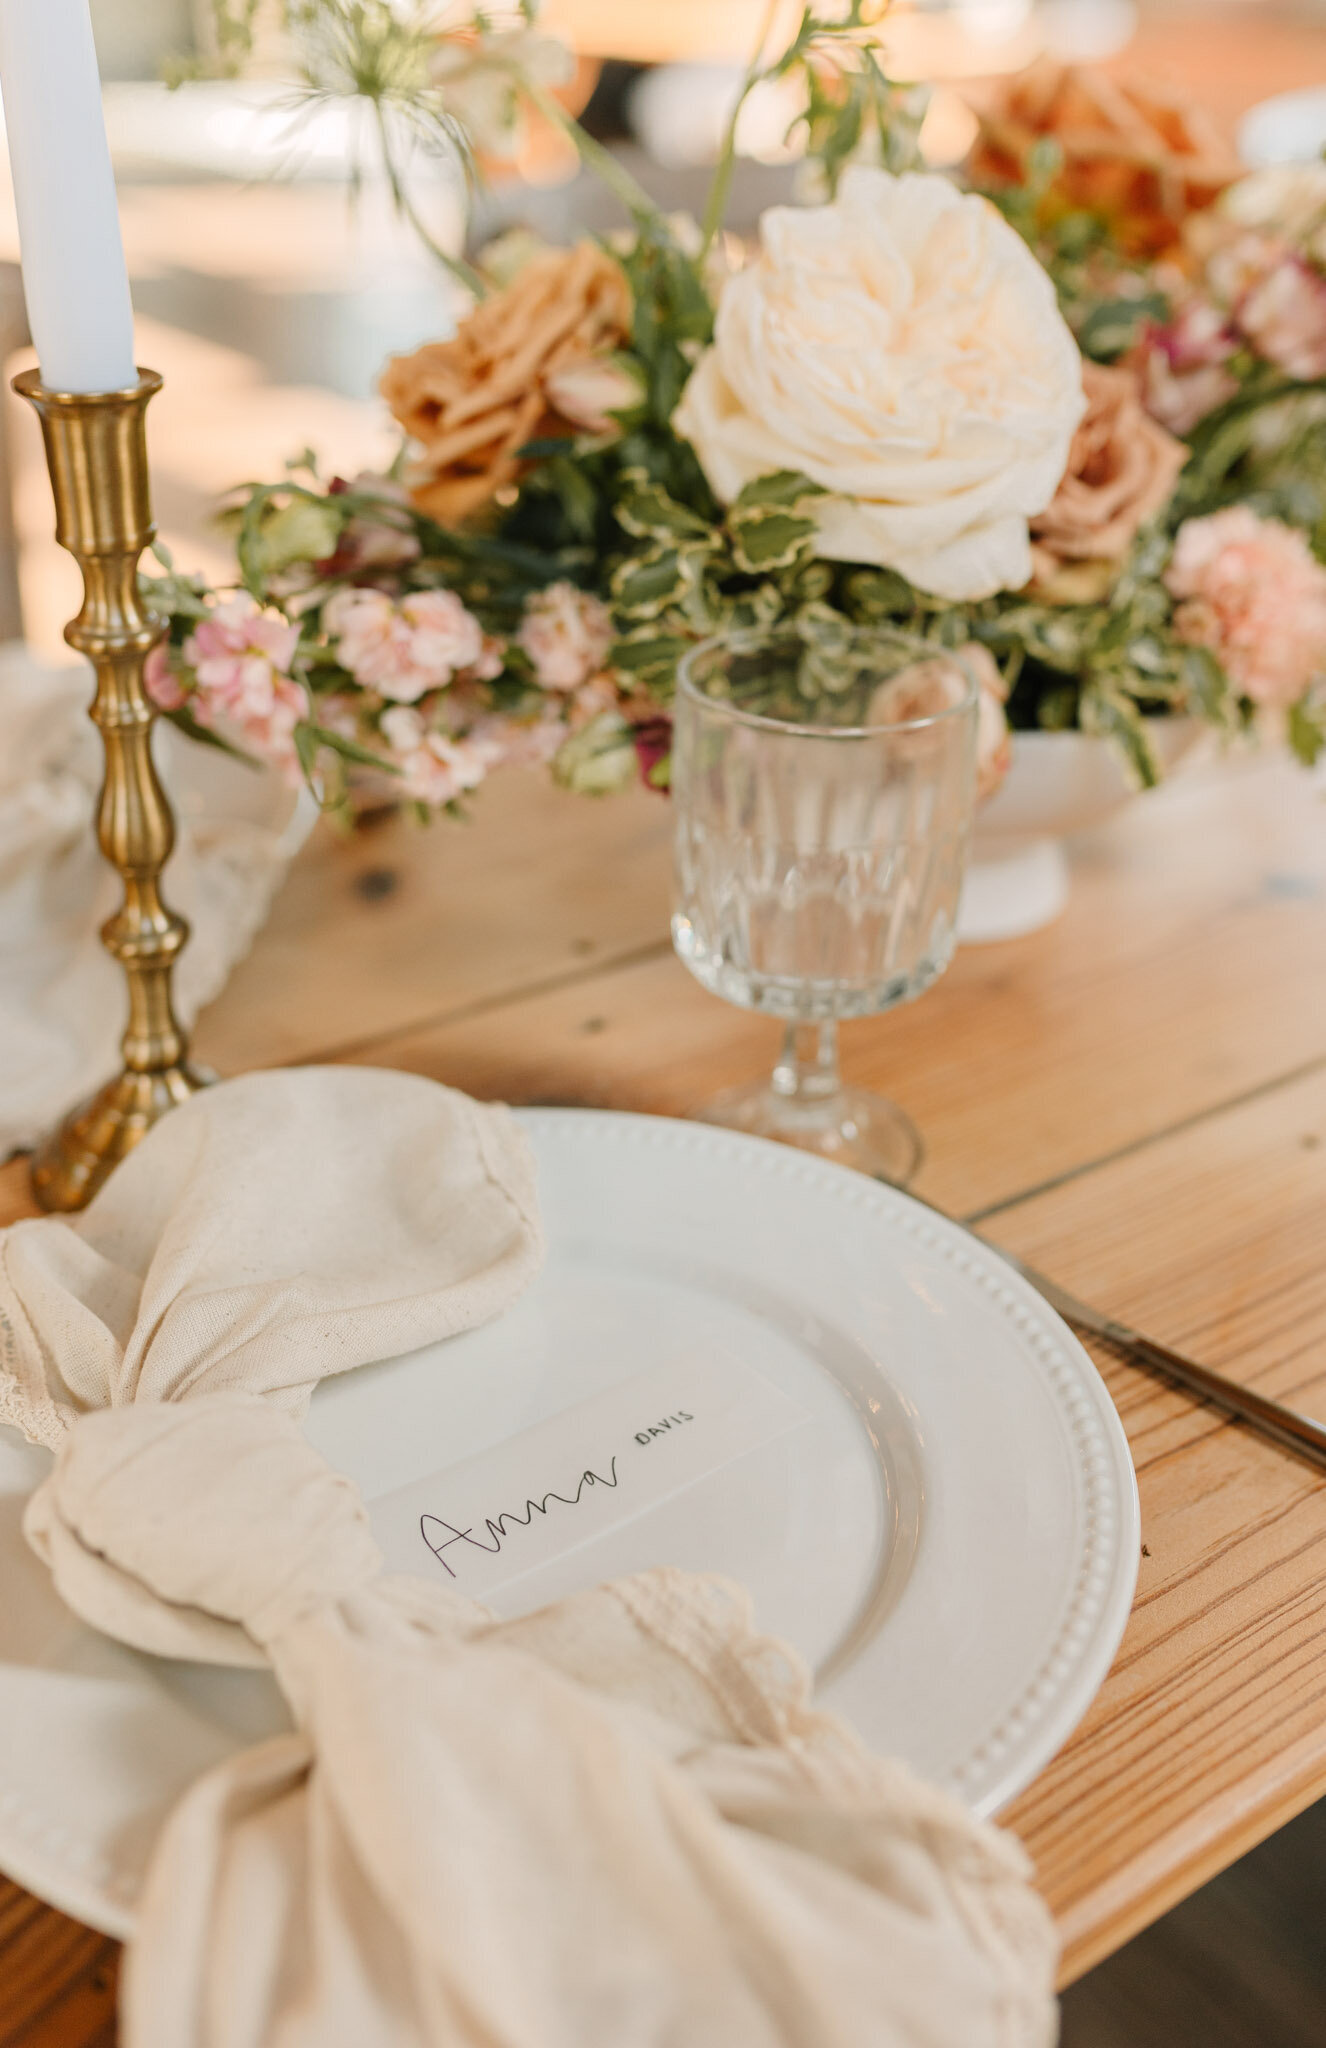 rustic elegant table decor with name card